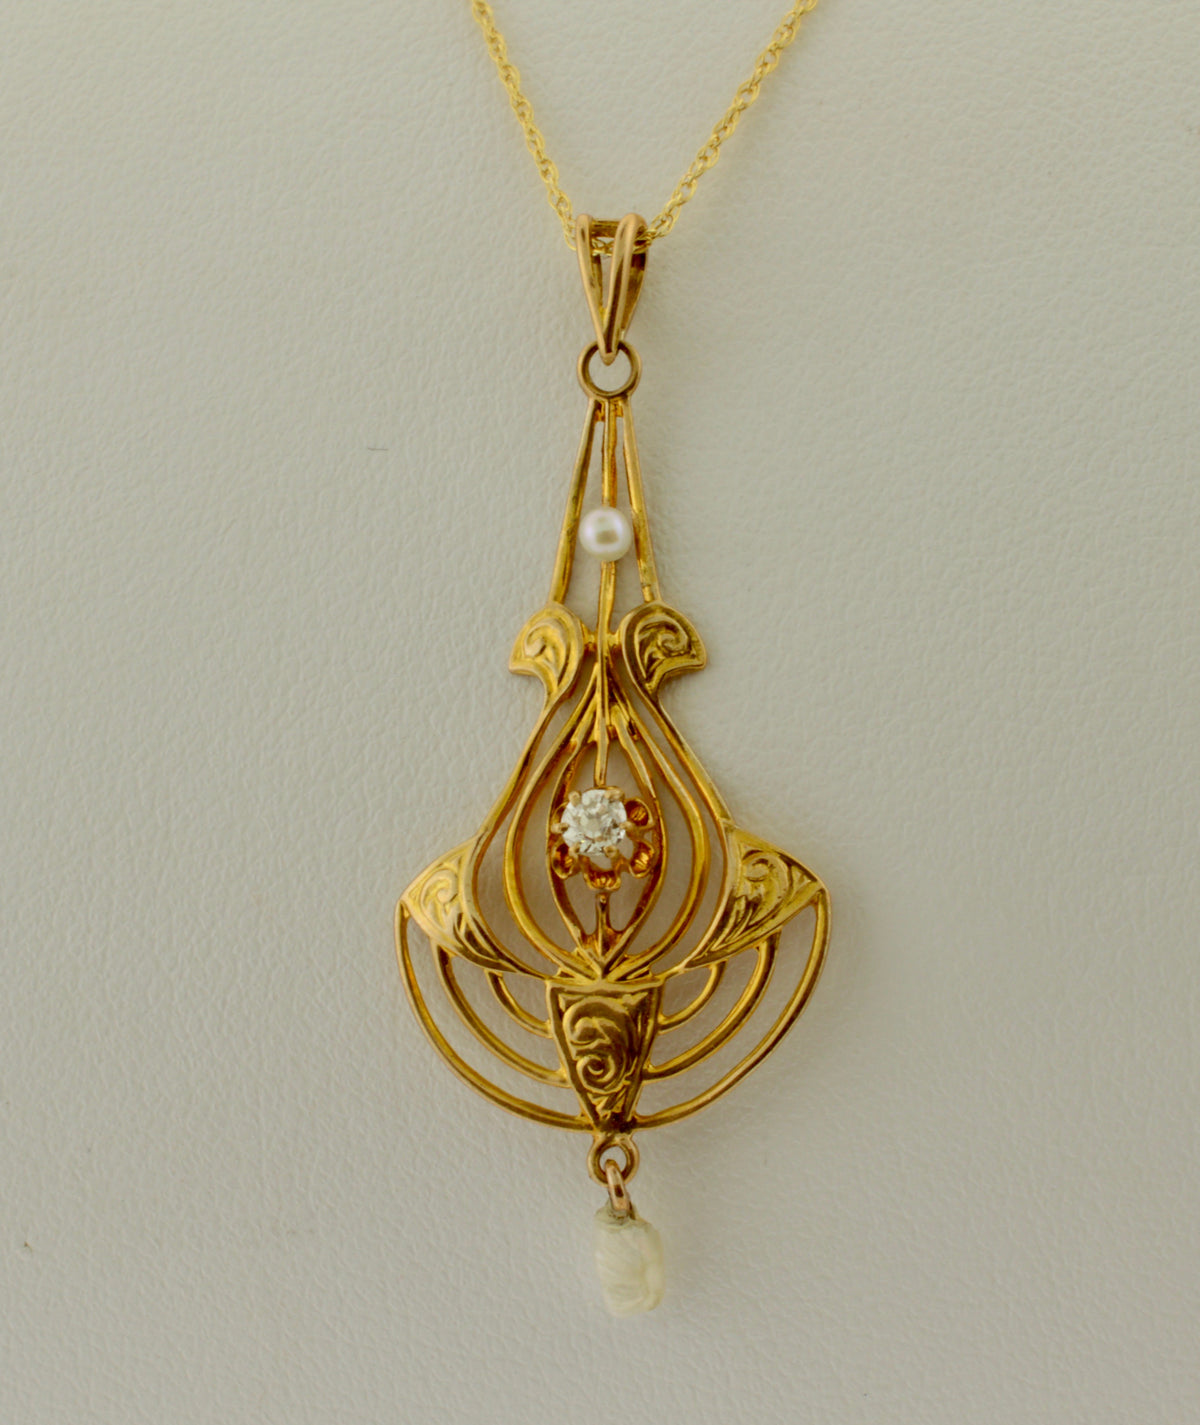 10K Yellow Gold Antique Diamond and Pearl Lavalier Necklace